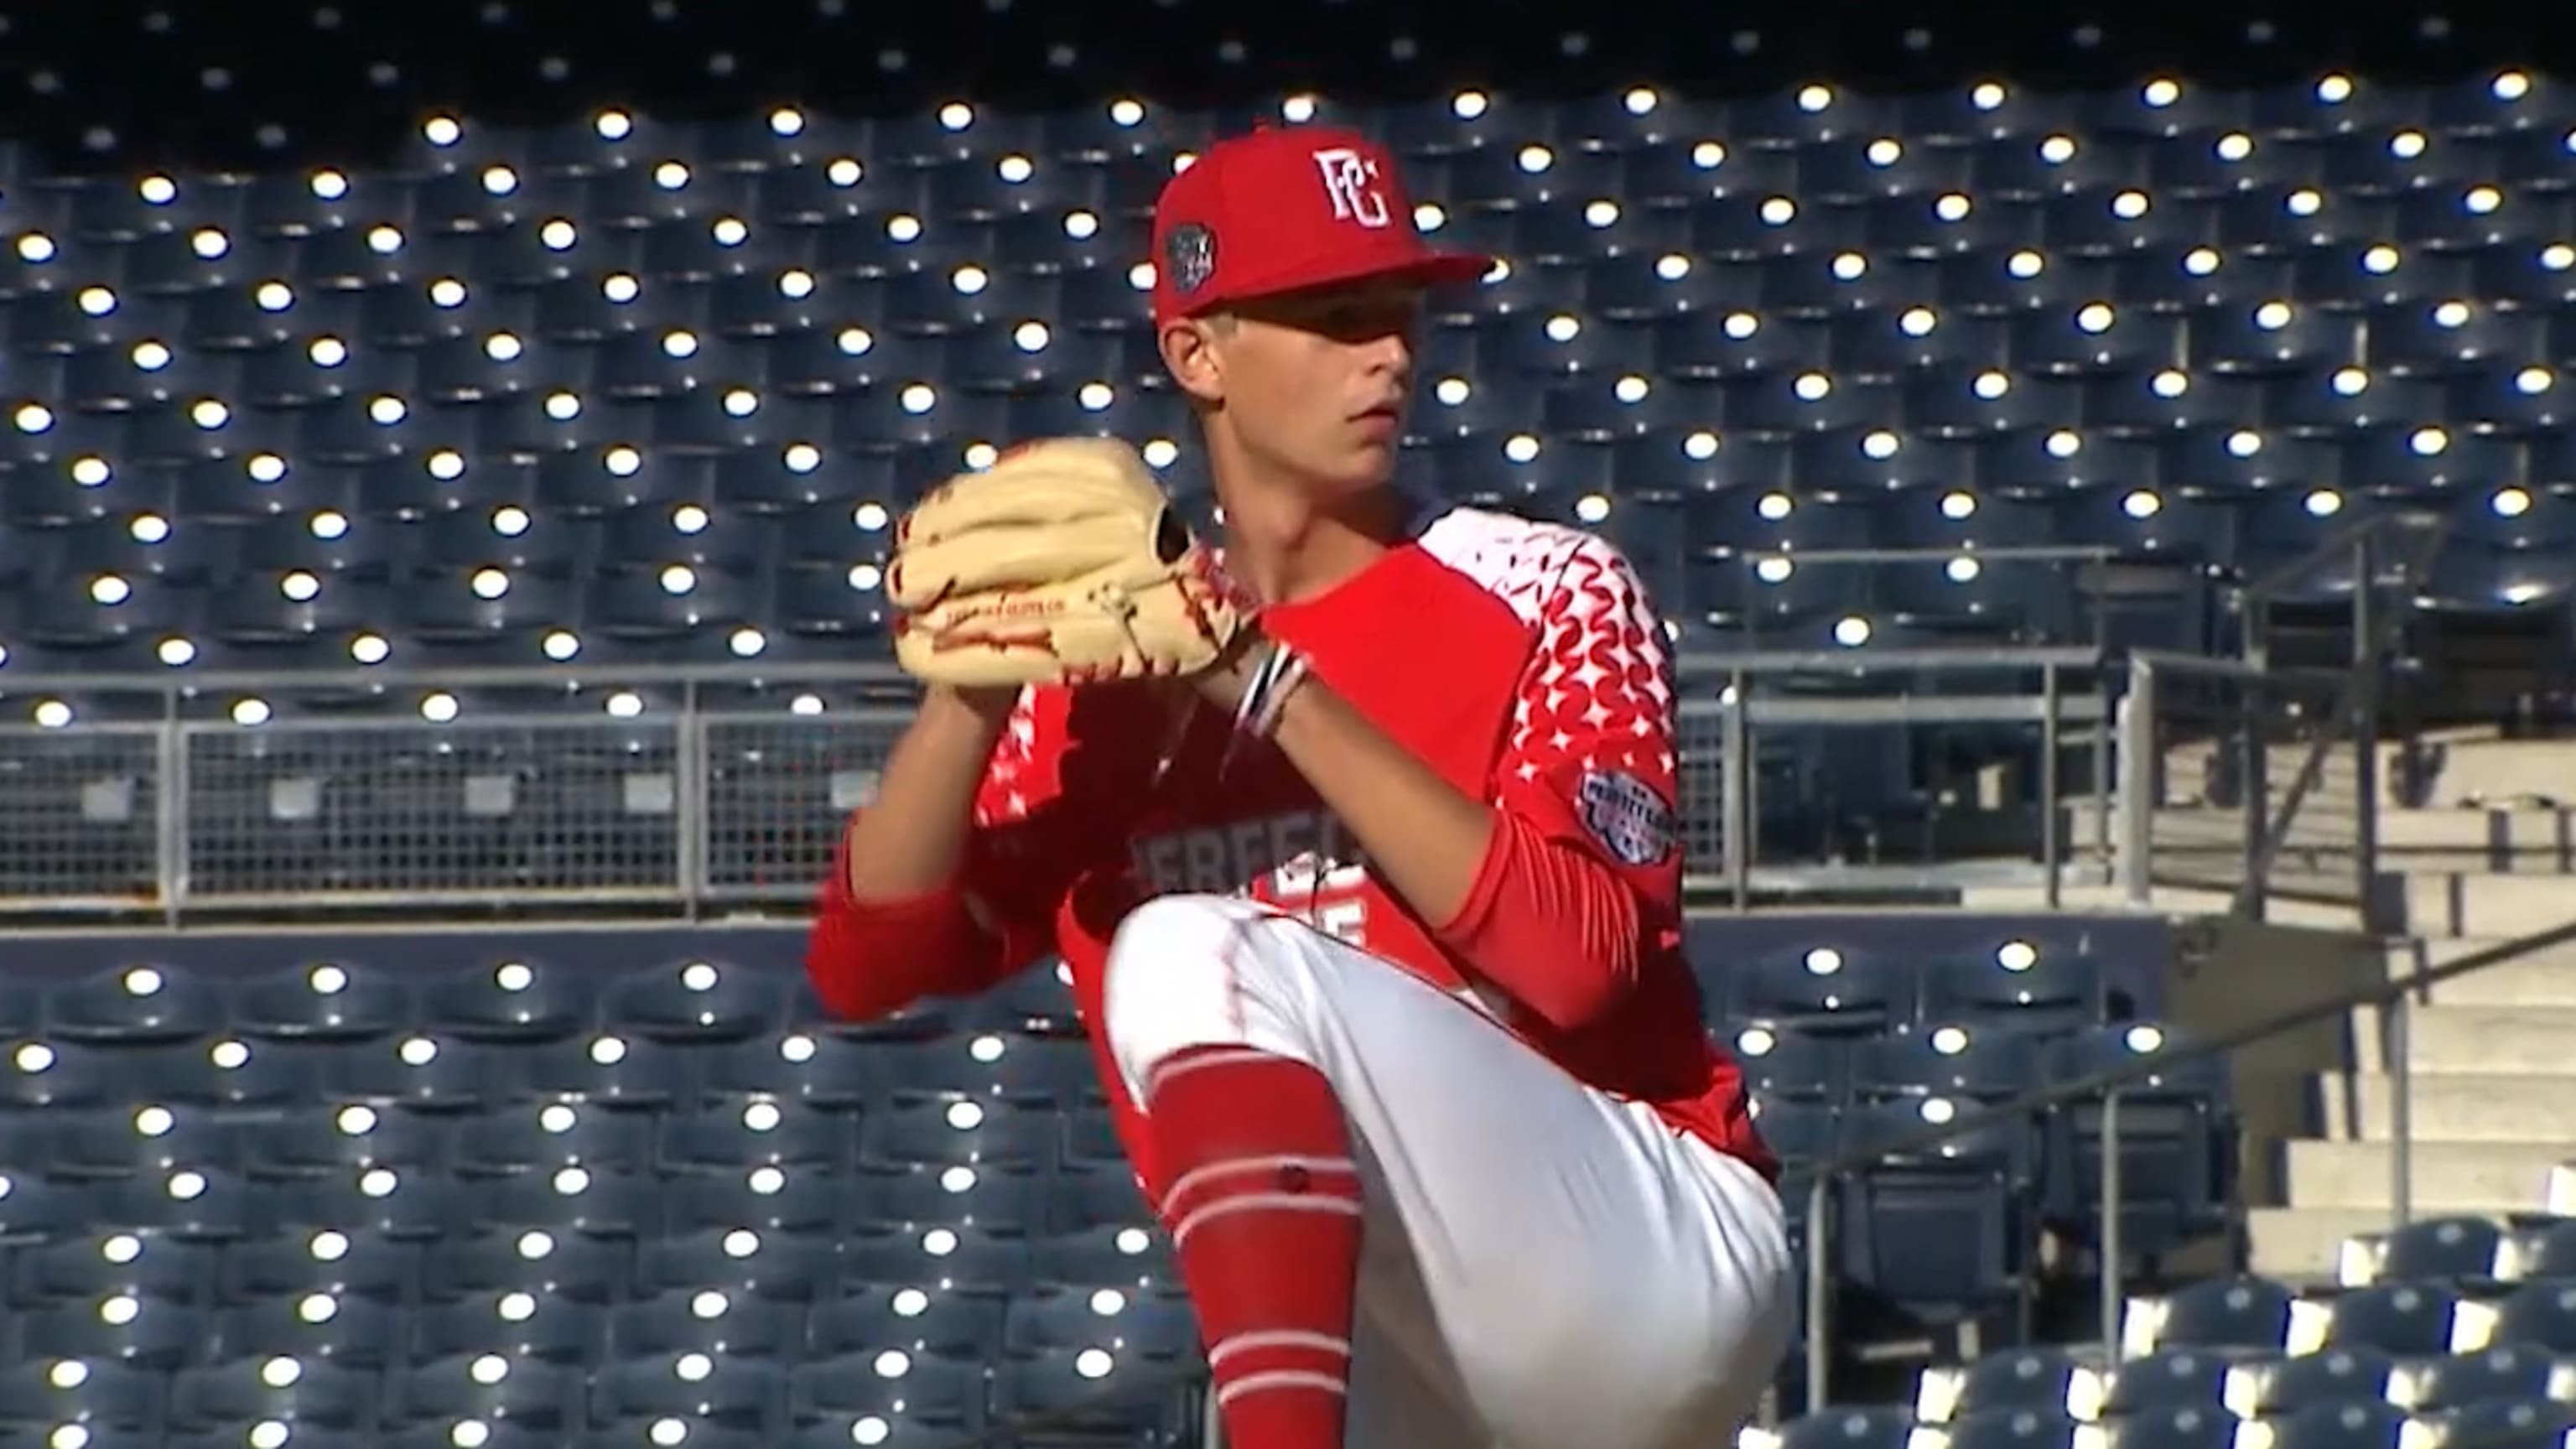 Phillies prospect Mick Abel dominates on the mound, while Justin